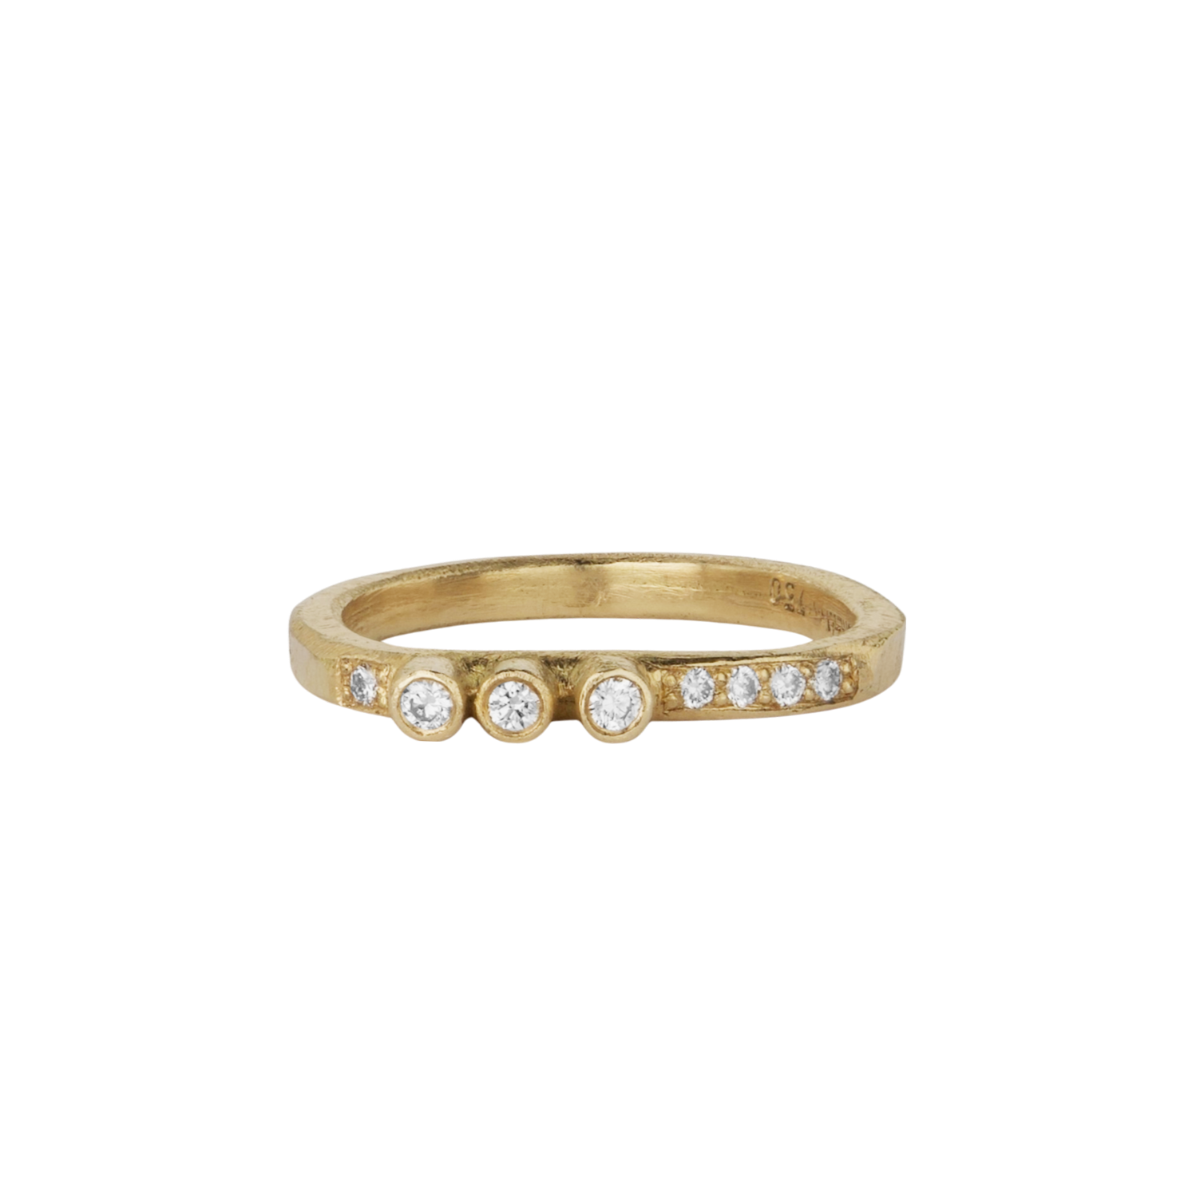 Eternity ring in 18kt gold with 8 white diamonds